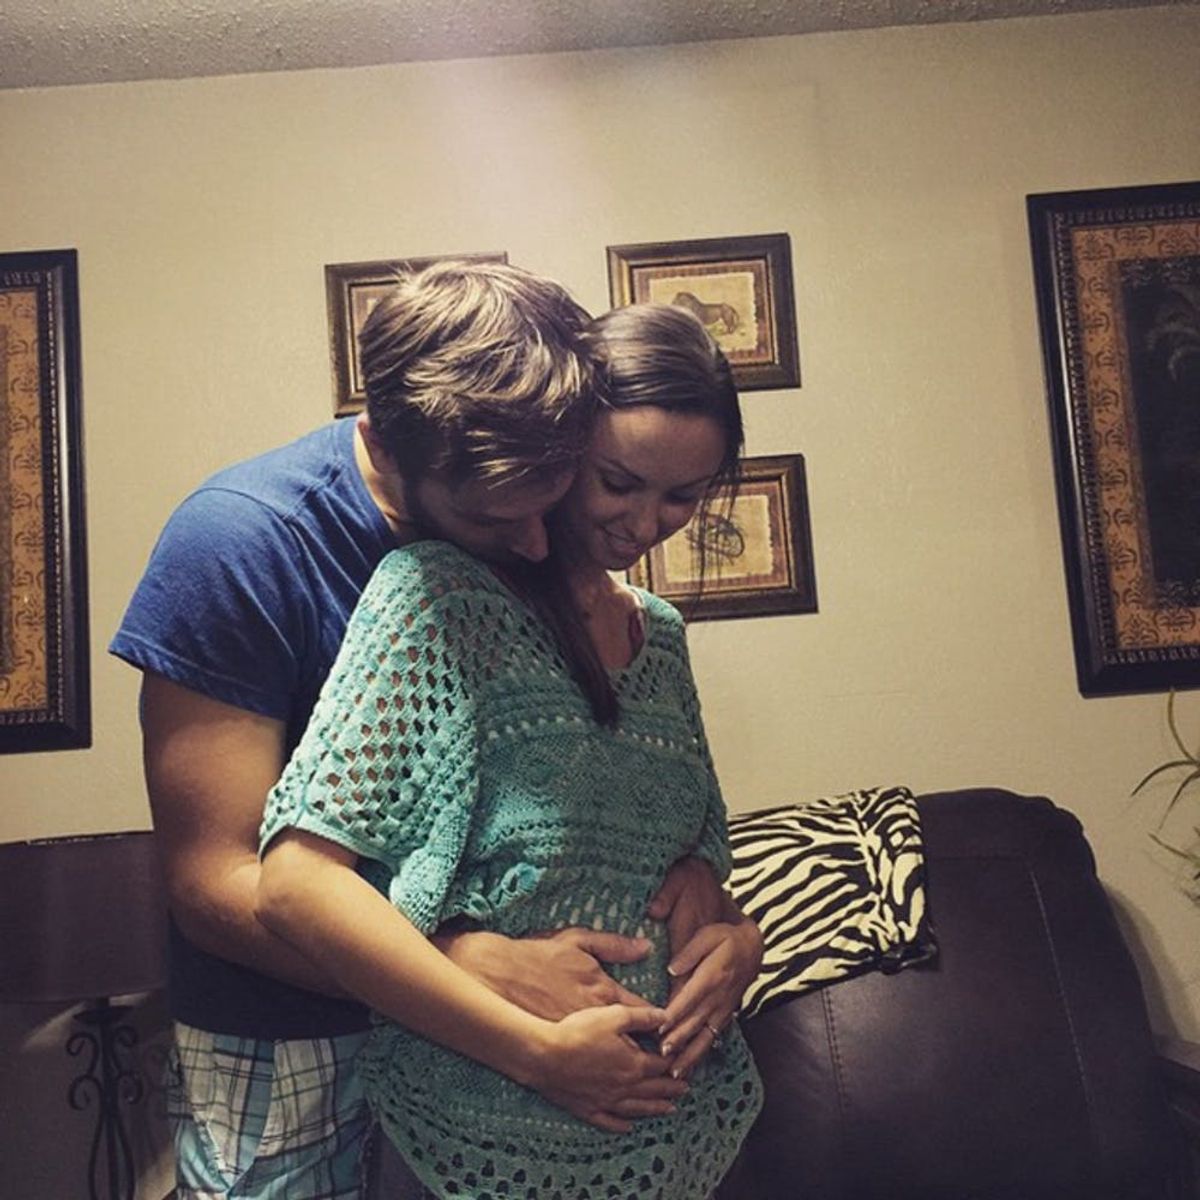 WTF: Watch This Husband Surprise His Wife With Big News… That She’s Pregnant